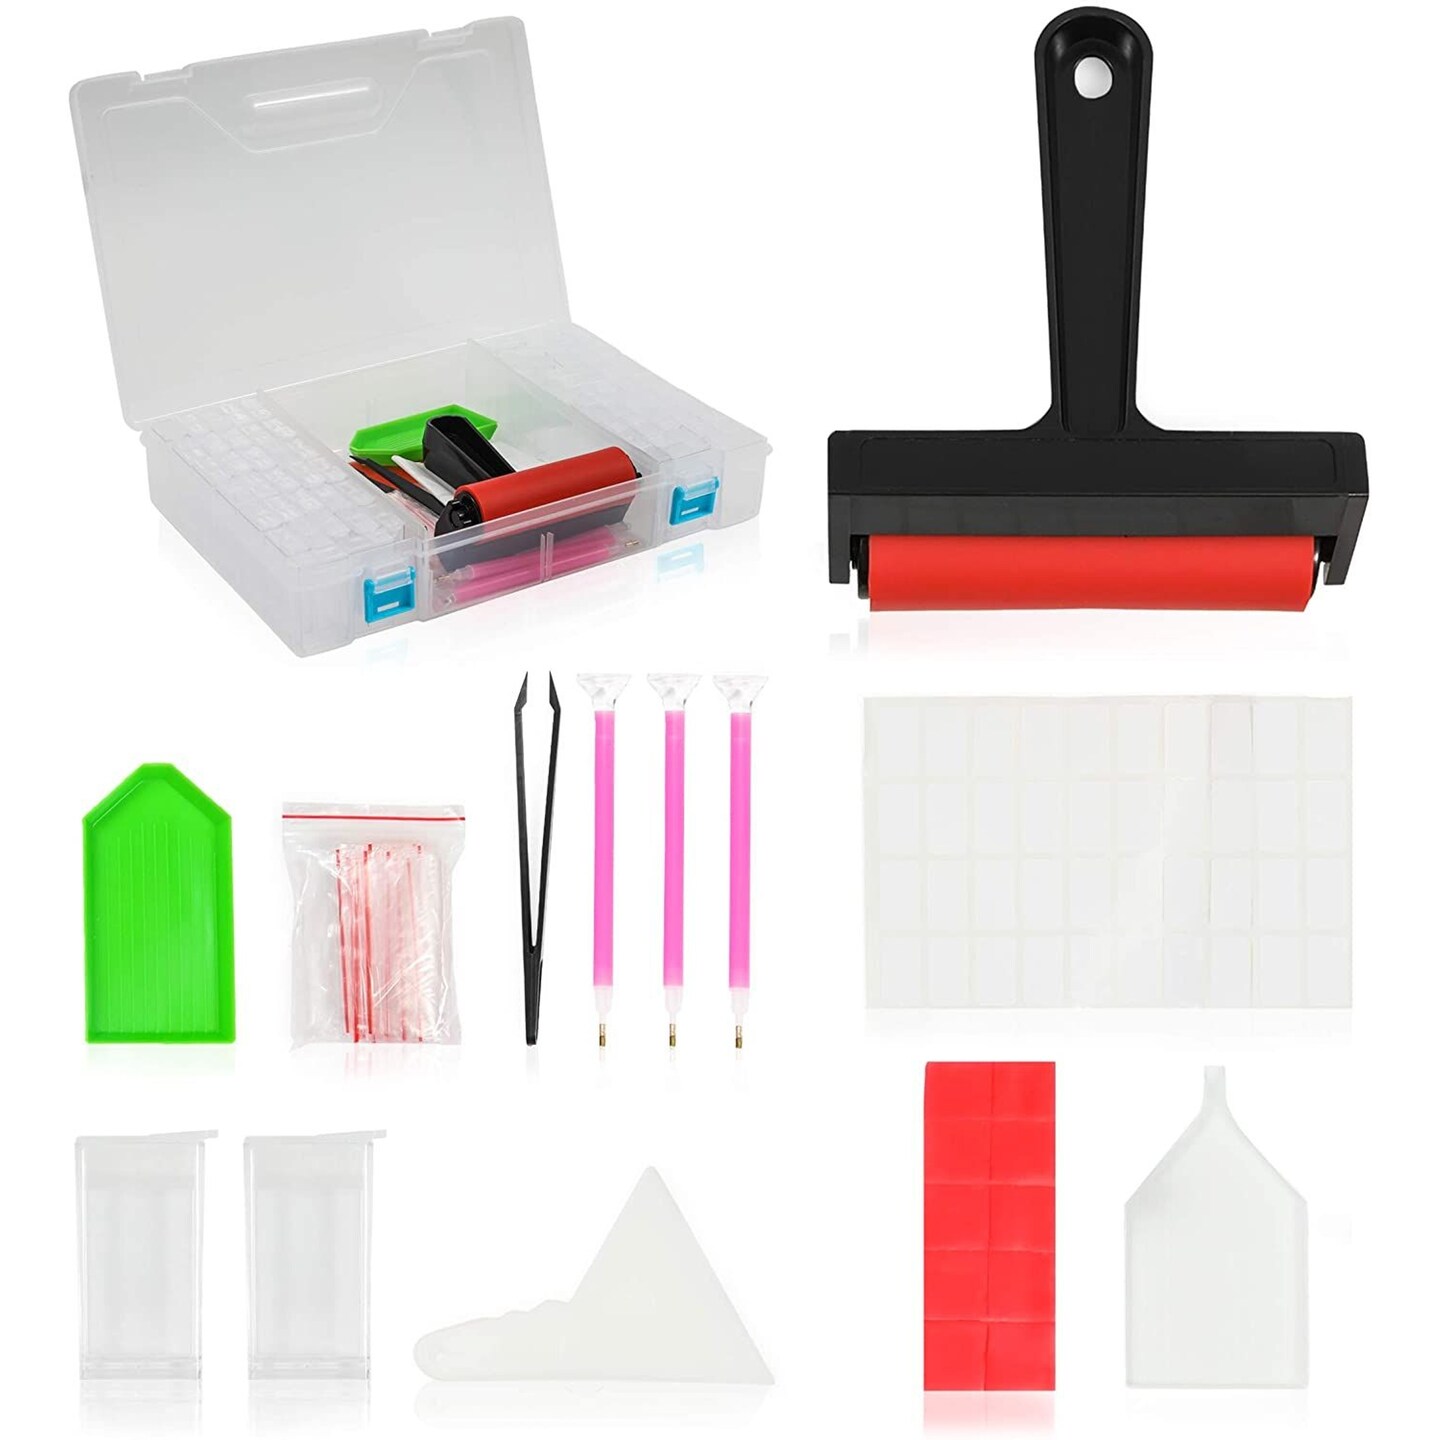 Diamond Painting Kit, Includes Accessory Storage Box, Fixing Tool